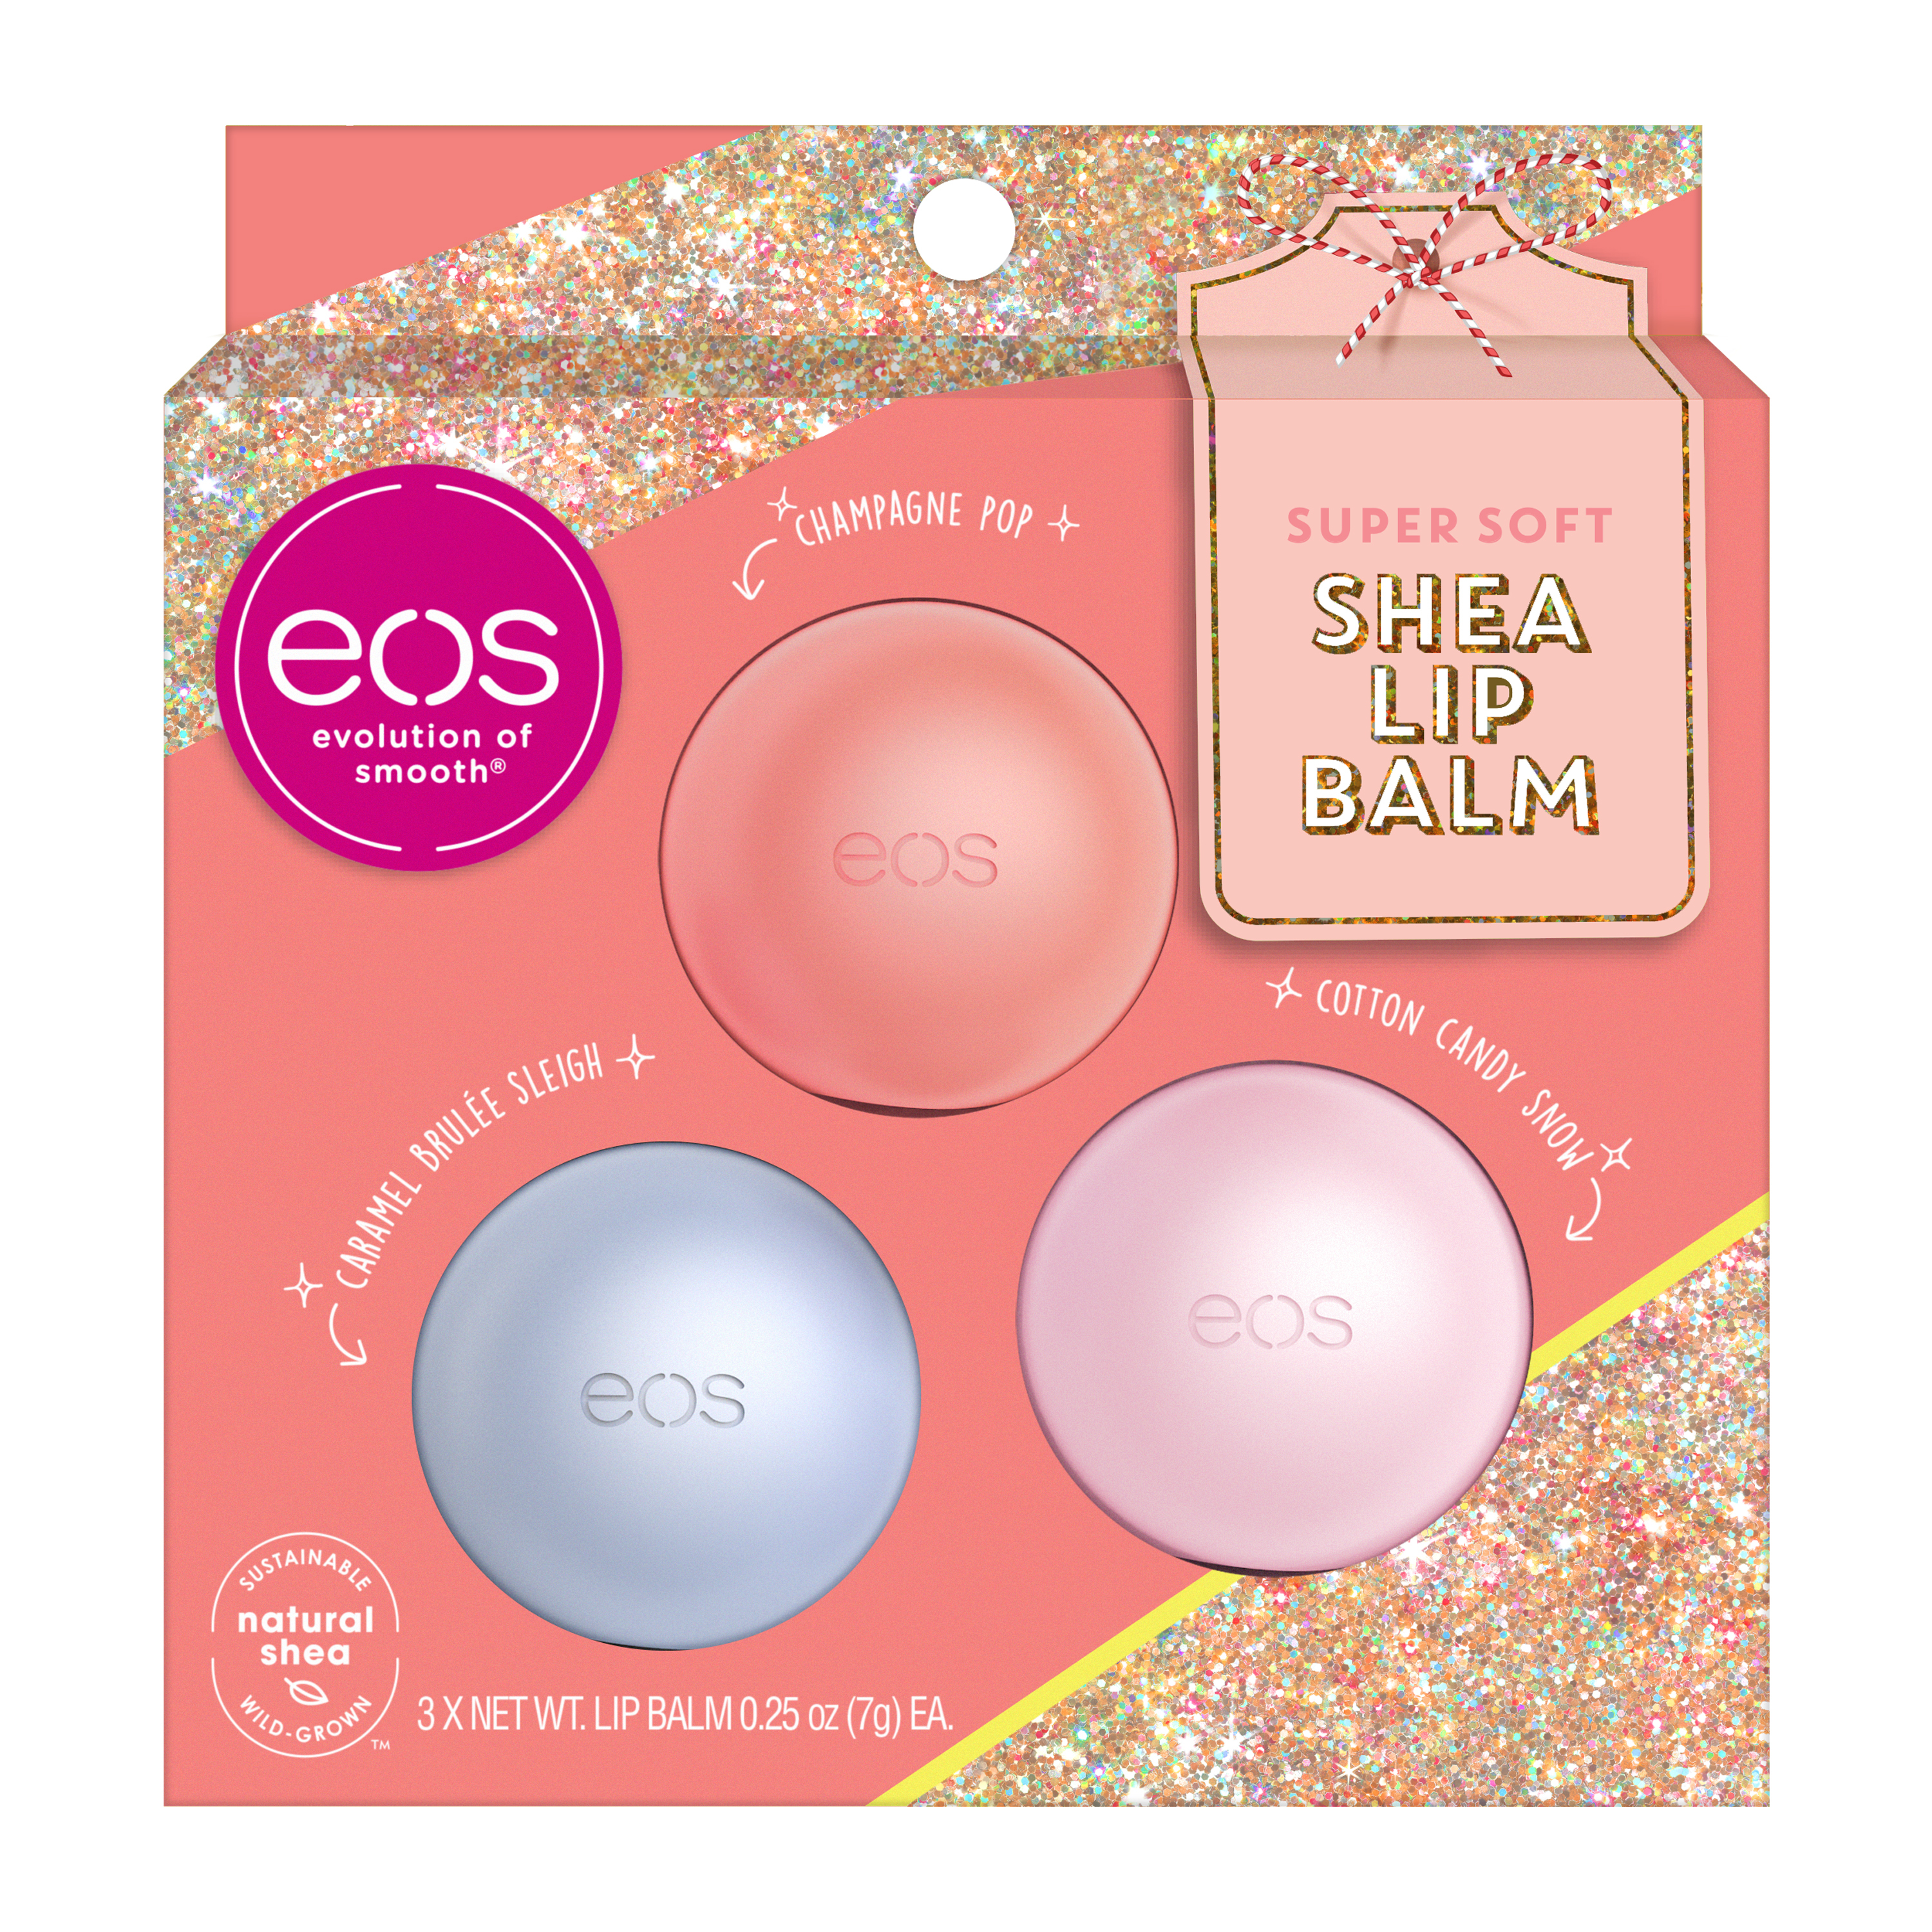 ($7.99 Value) eos Holiday Lip Balm Sphere , Cotton Candy Snow, Caramel Brulée Sleigh and Champagne Pop , Moisuturzing Shea Butter for Chapped Lips , 3 Count - image 1 of 9